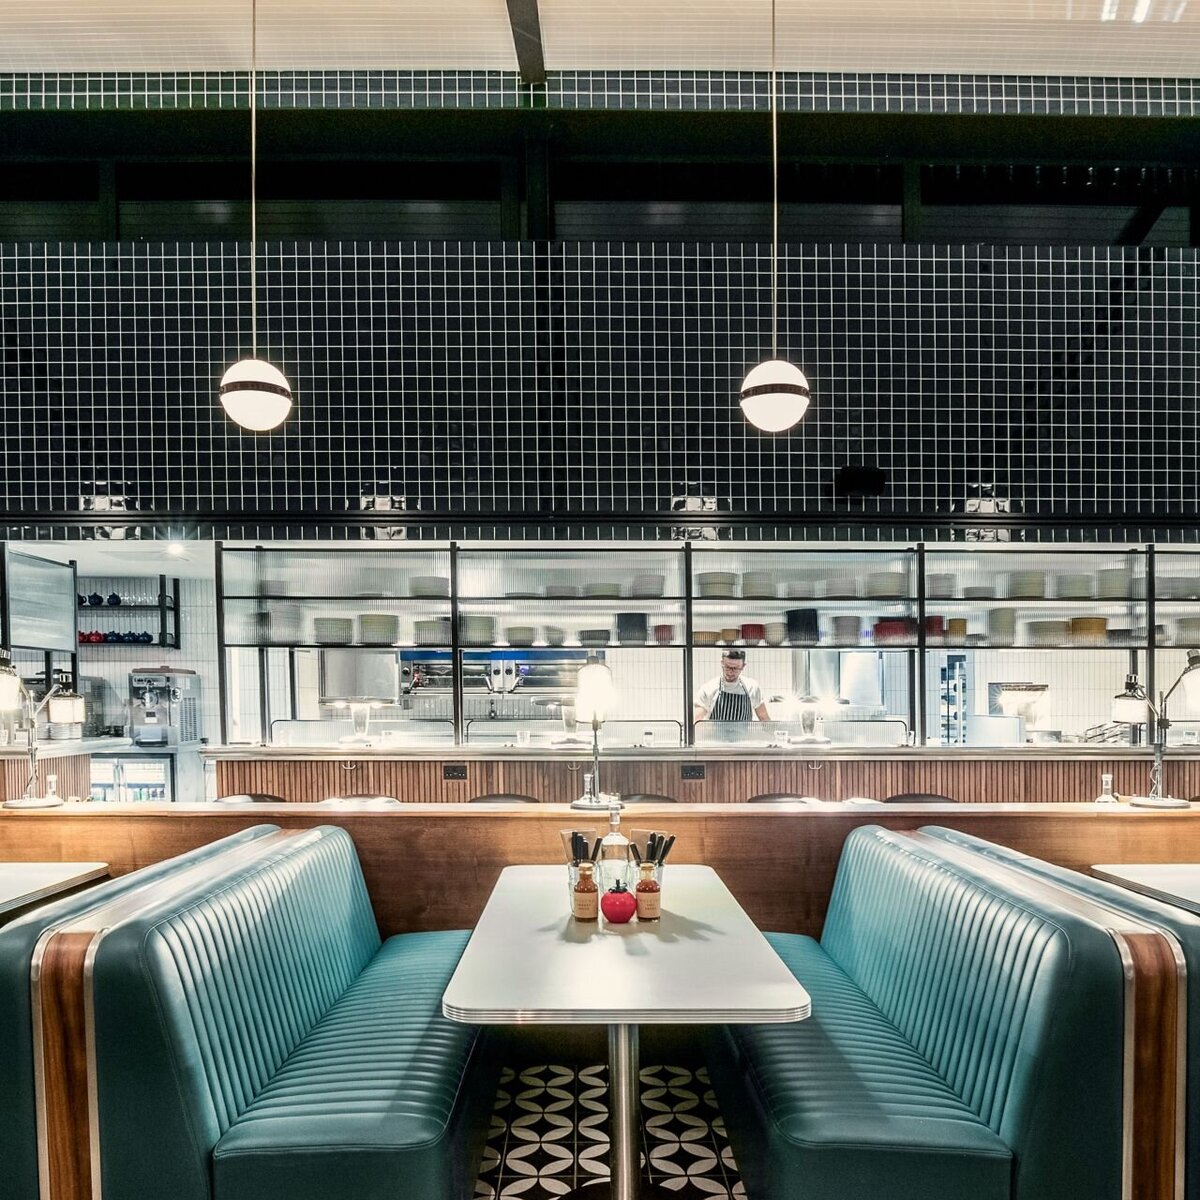 Diner Restaurant Booths with channel tufted leather benches, dining table with laminate tops and metal base. Black tiled walls and globe pendant lights in the background